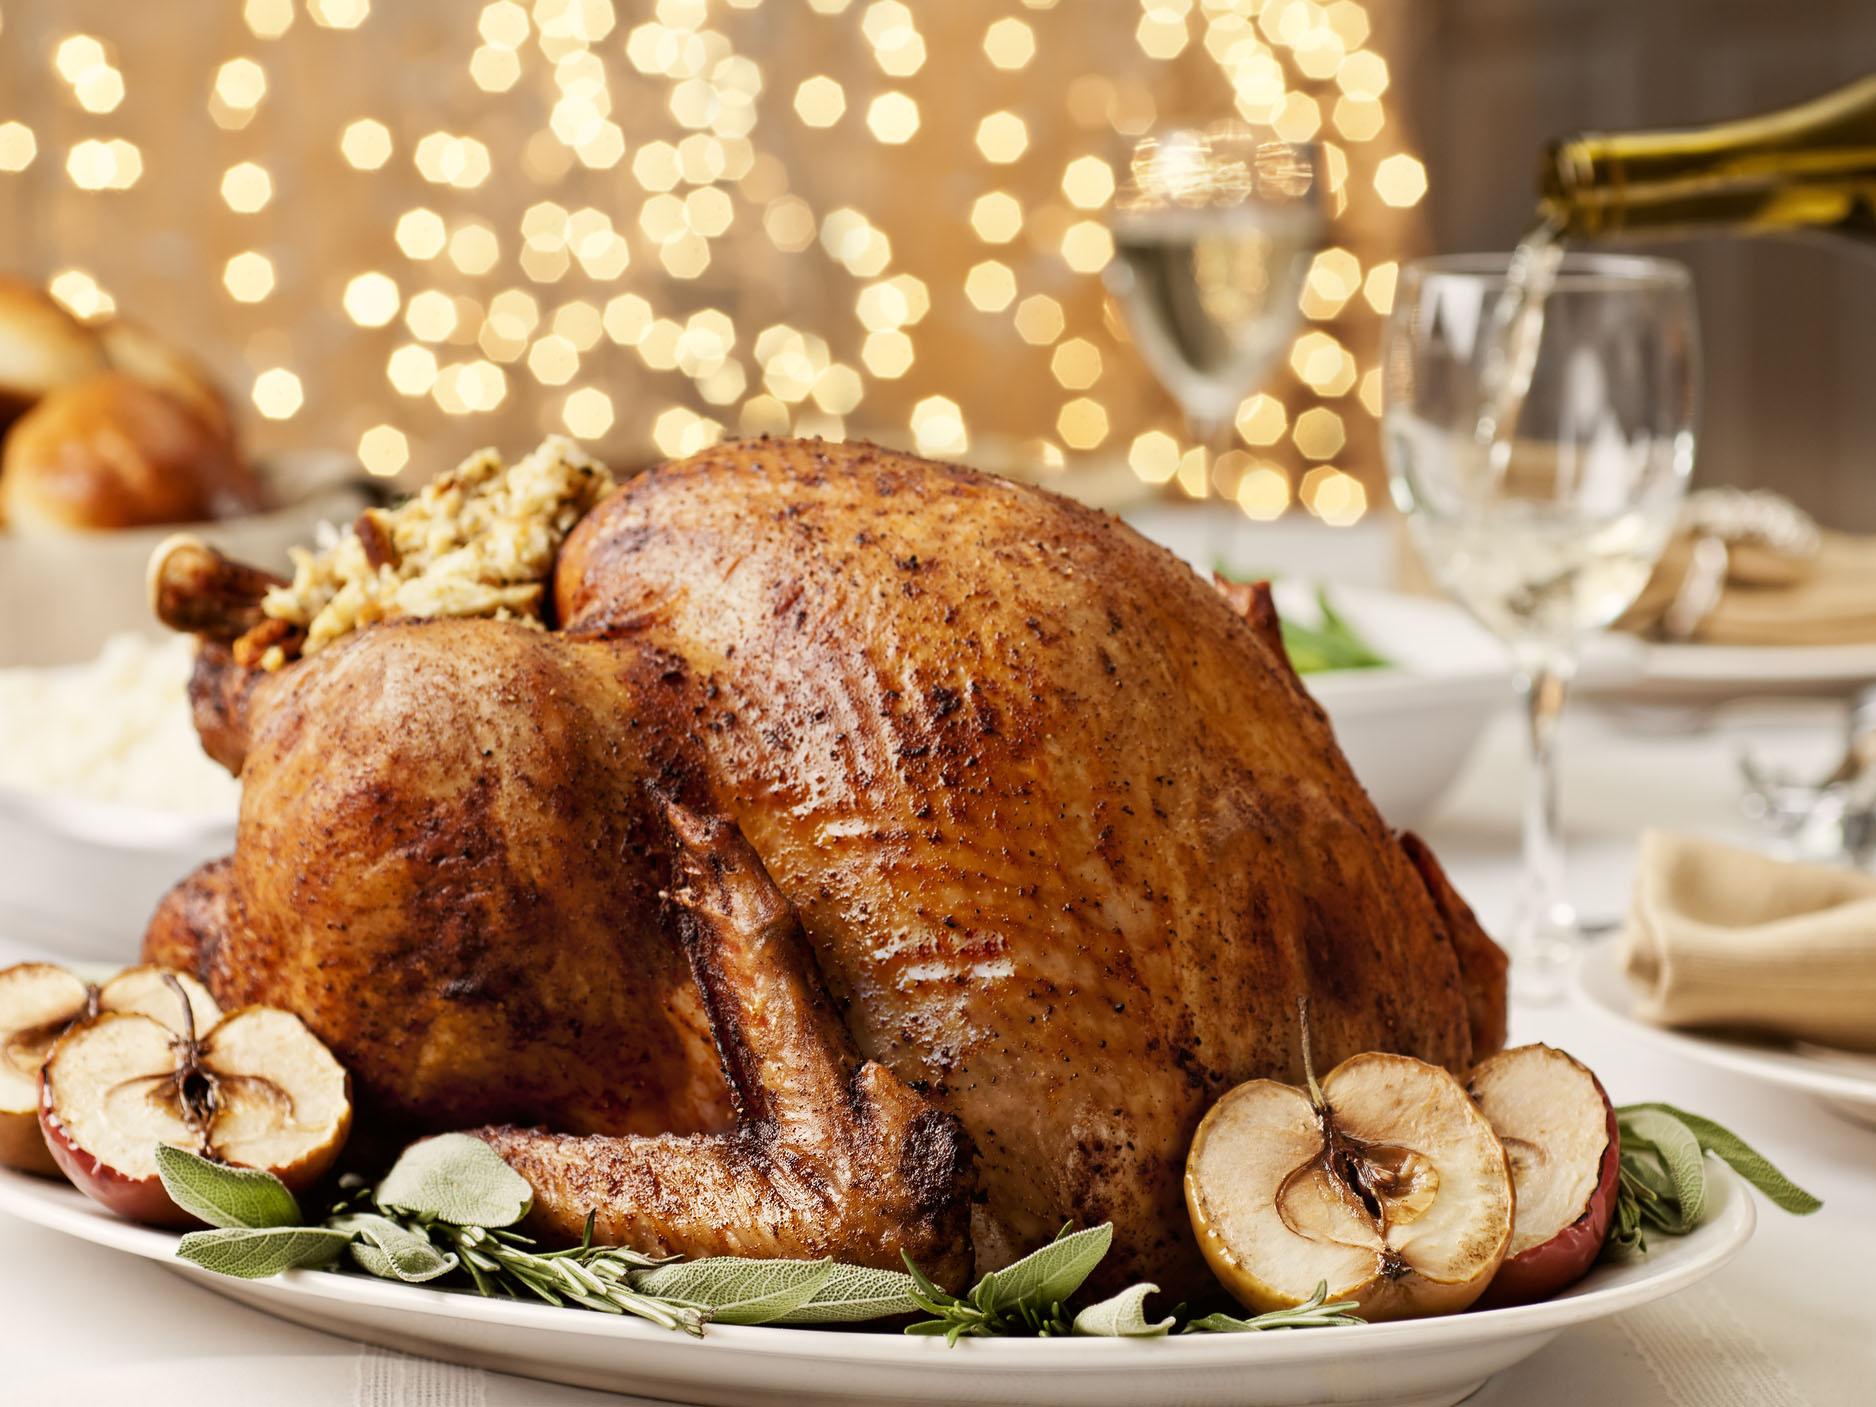 Recent research has found at least 10 per cent of households will opt for a vegetarian Christmas dinner this year